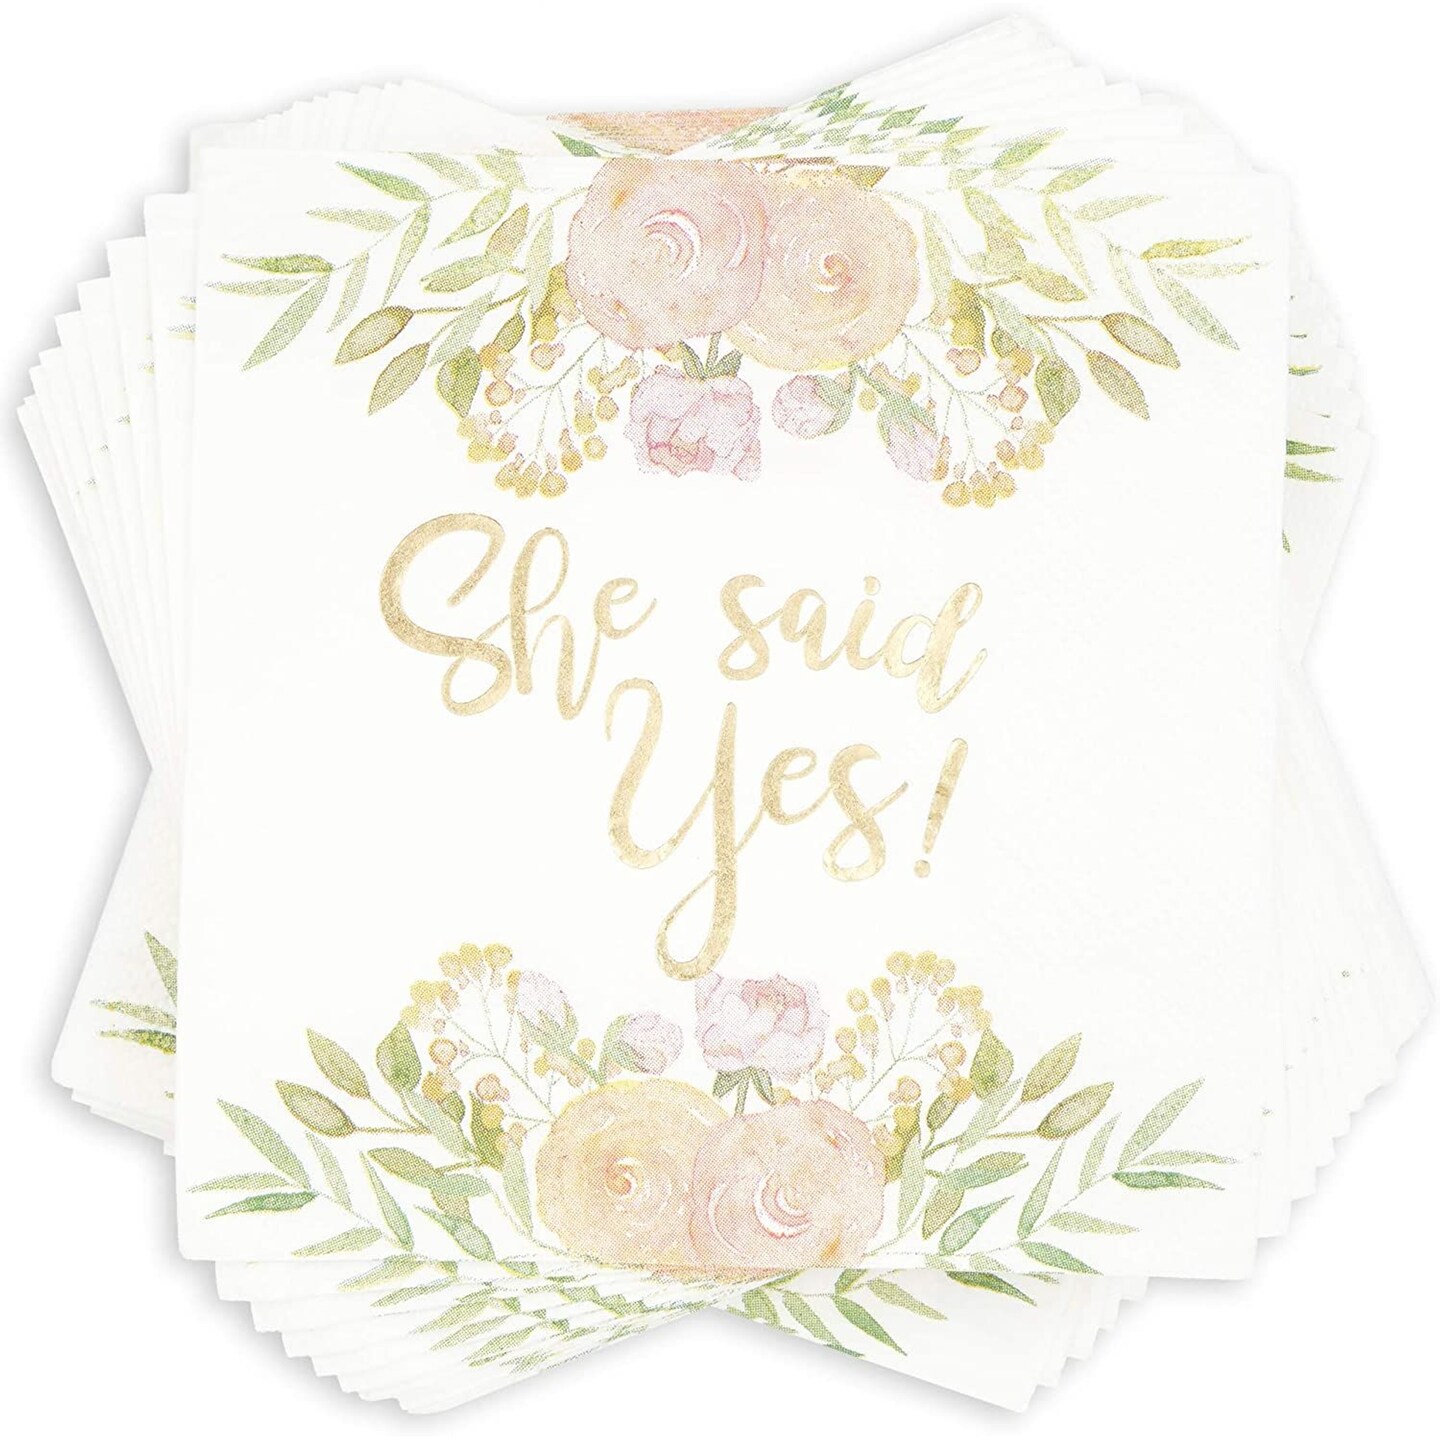 50 Pack Gold Foil She Said Yes Napkins for Engagement Party Supplies, Bridal Shower Decorations, Luncheon, Wedding Decor, Disposable, 3-Ply (White, 5 x 5 Inches)